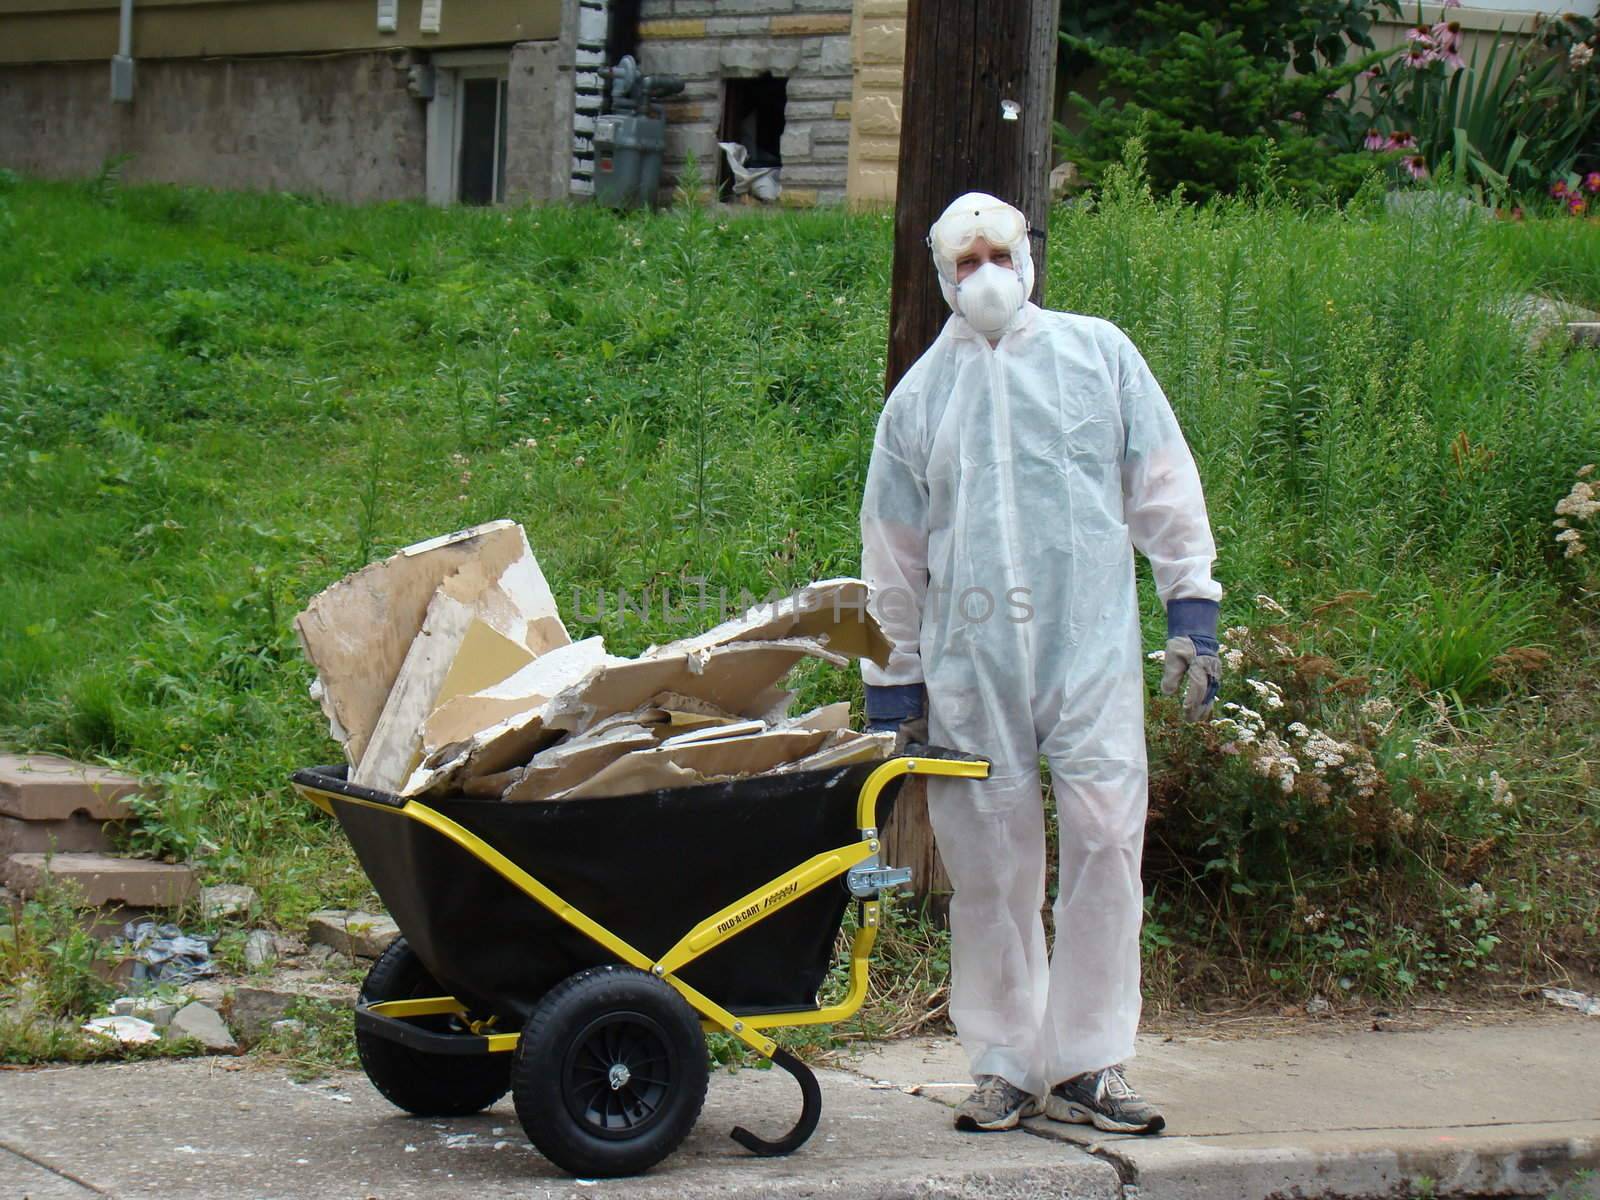 hazzardous waste removal by man wearing protective gear